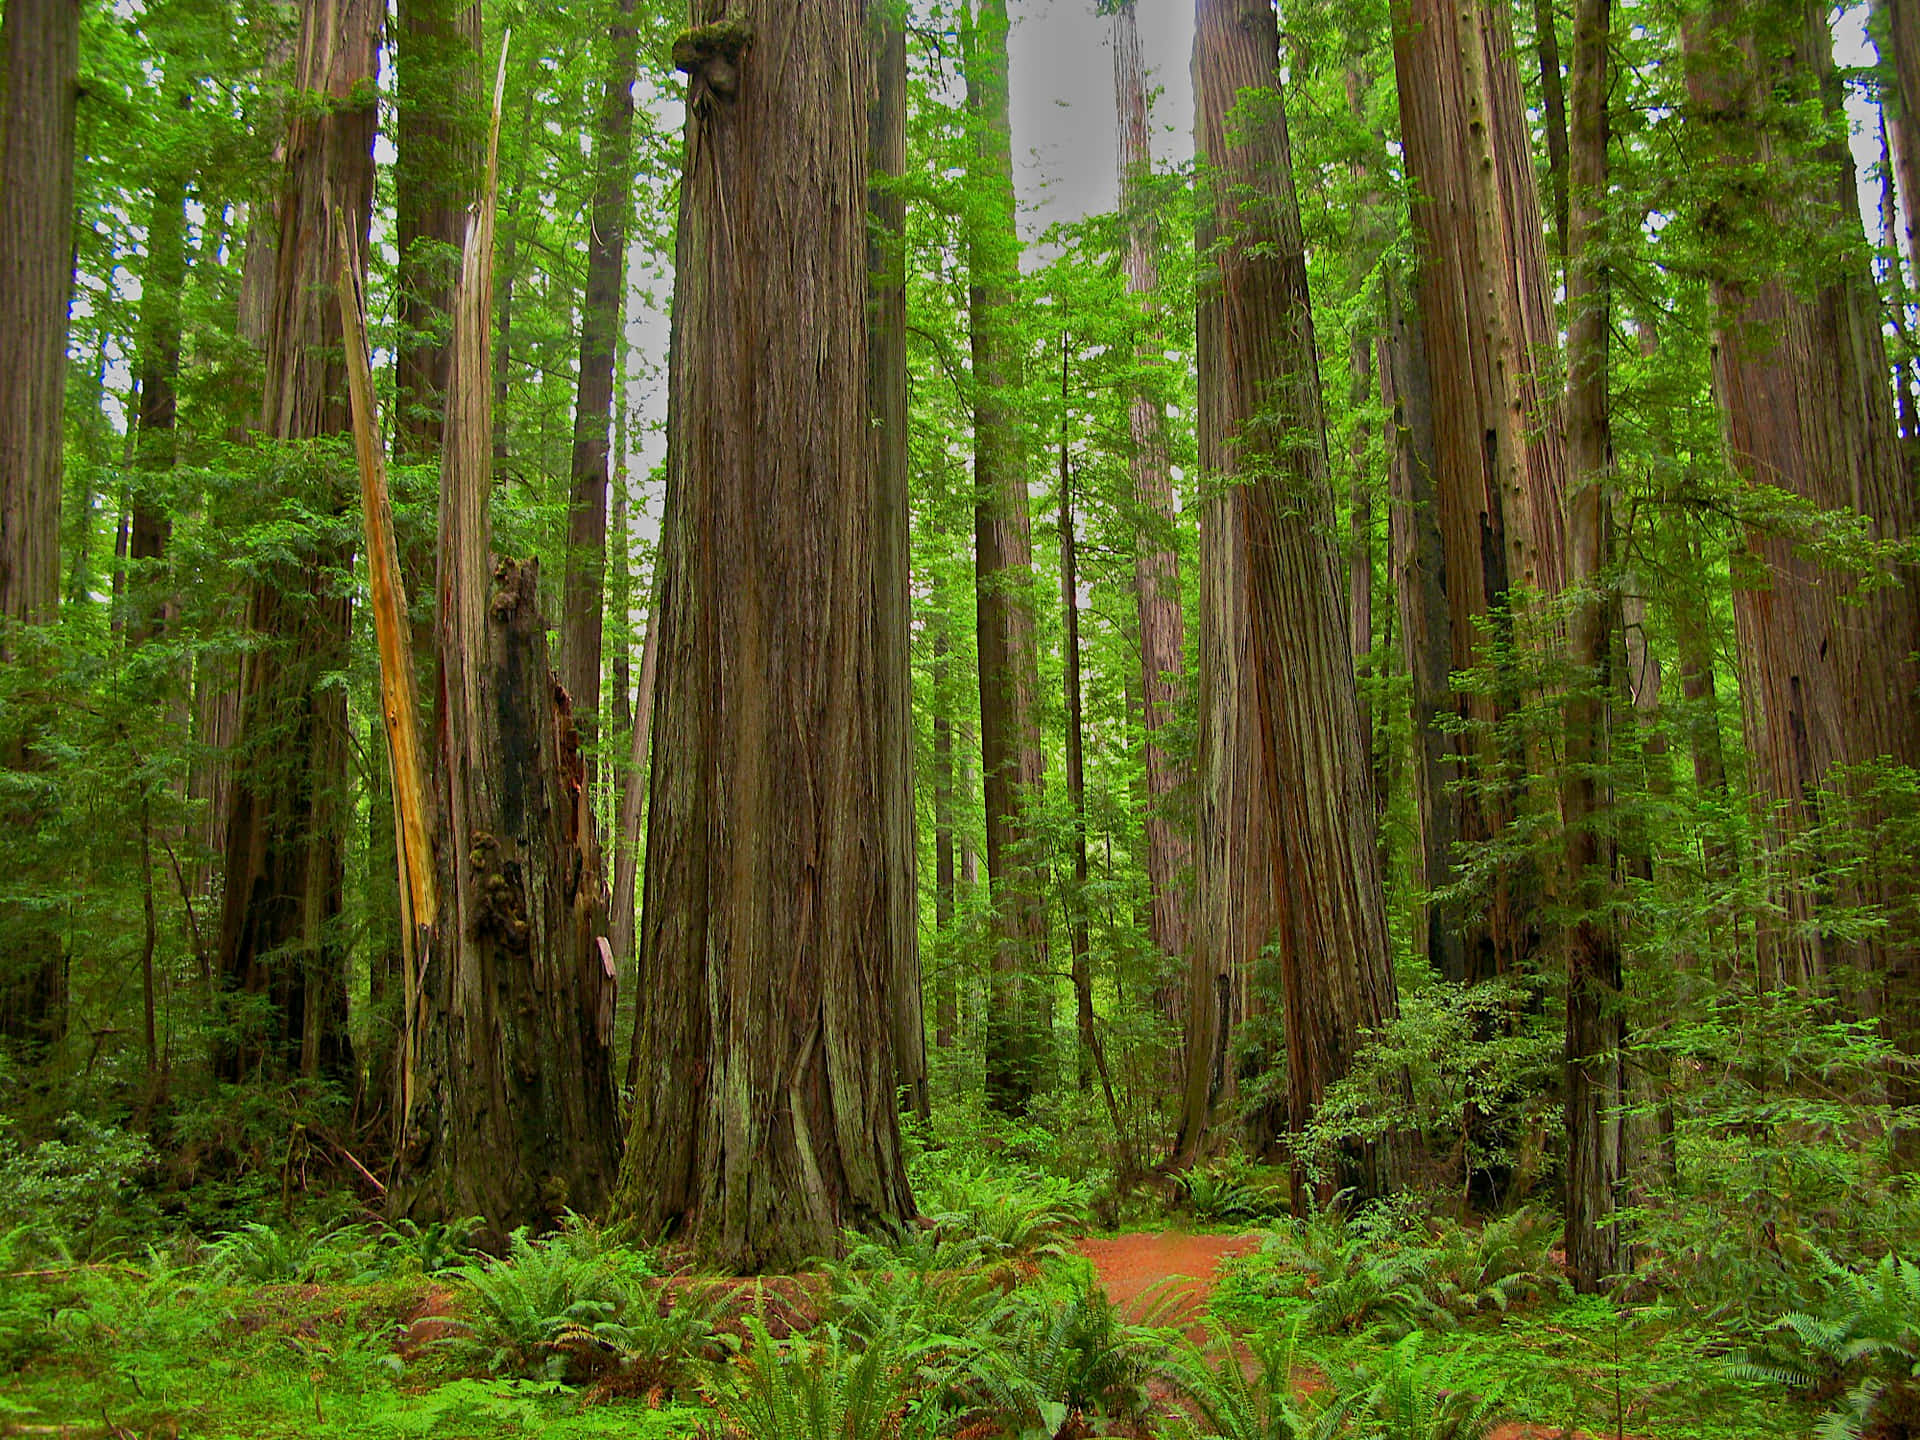 "Glorious Redwood Trees in Northern California."